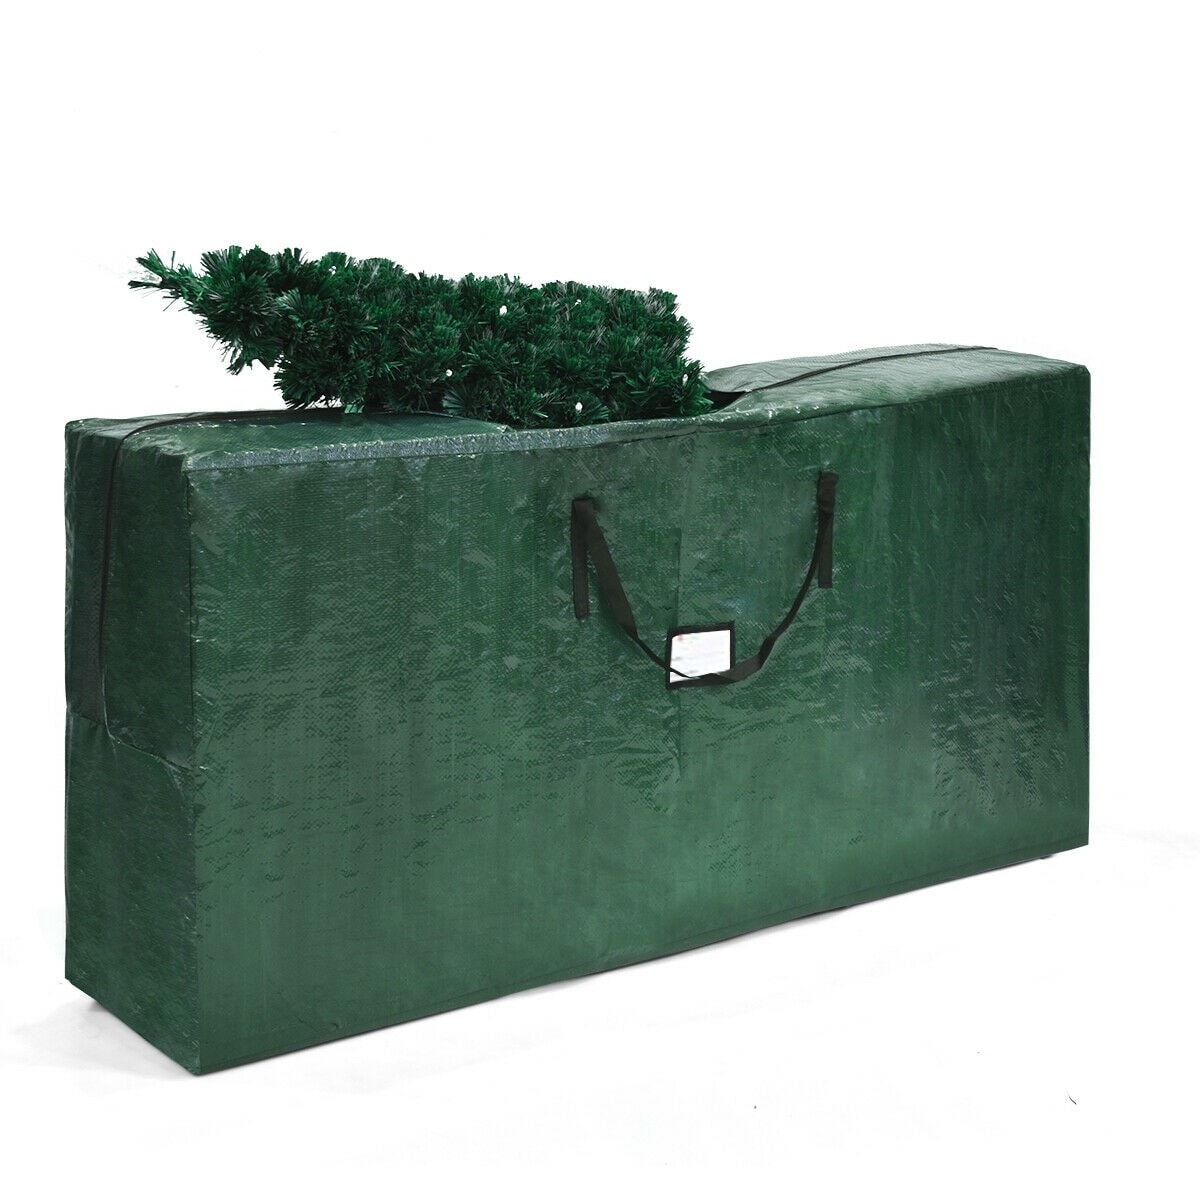 https://ak1.ostkcdn.com/images/products/is/images/direct/ecb8670b54403c29685f5292cf3756605a321c62/Christmas-Tree-PE-Storage-Bag-for-9ft-Artificial-Tree.jpg